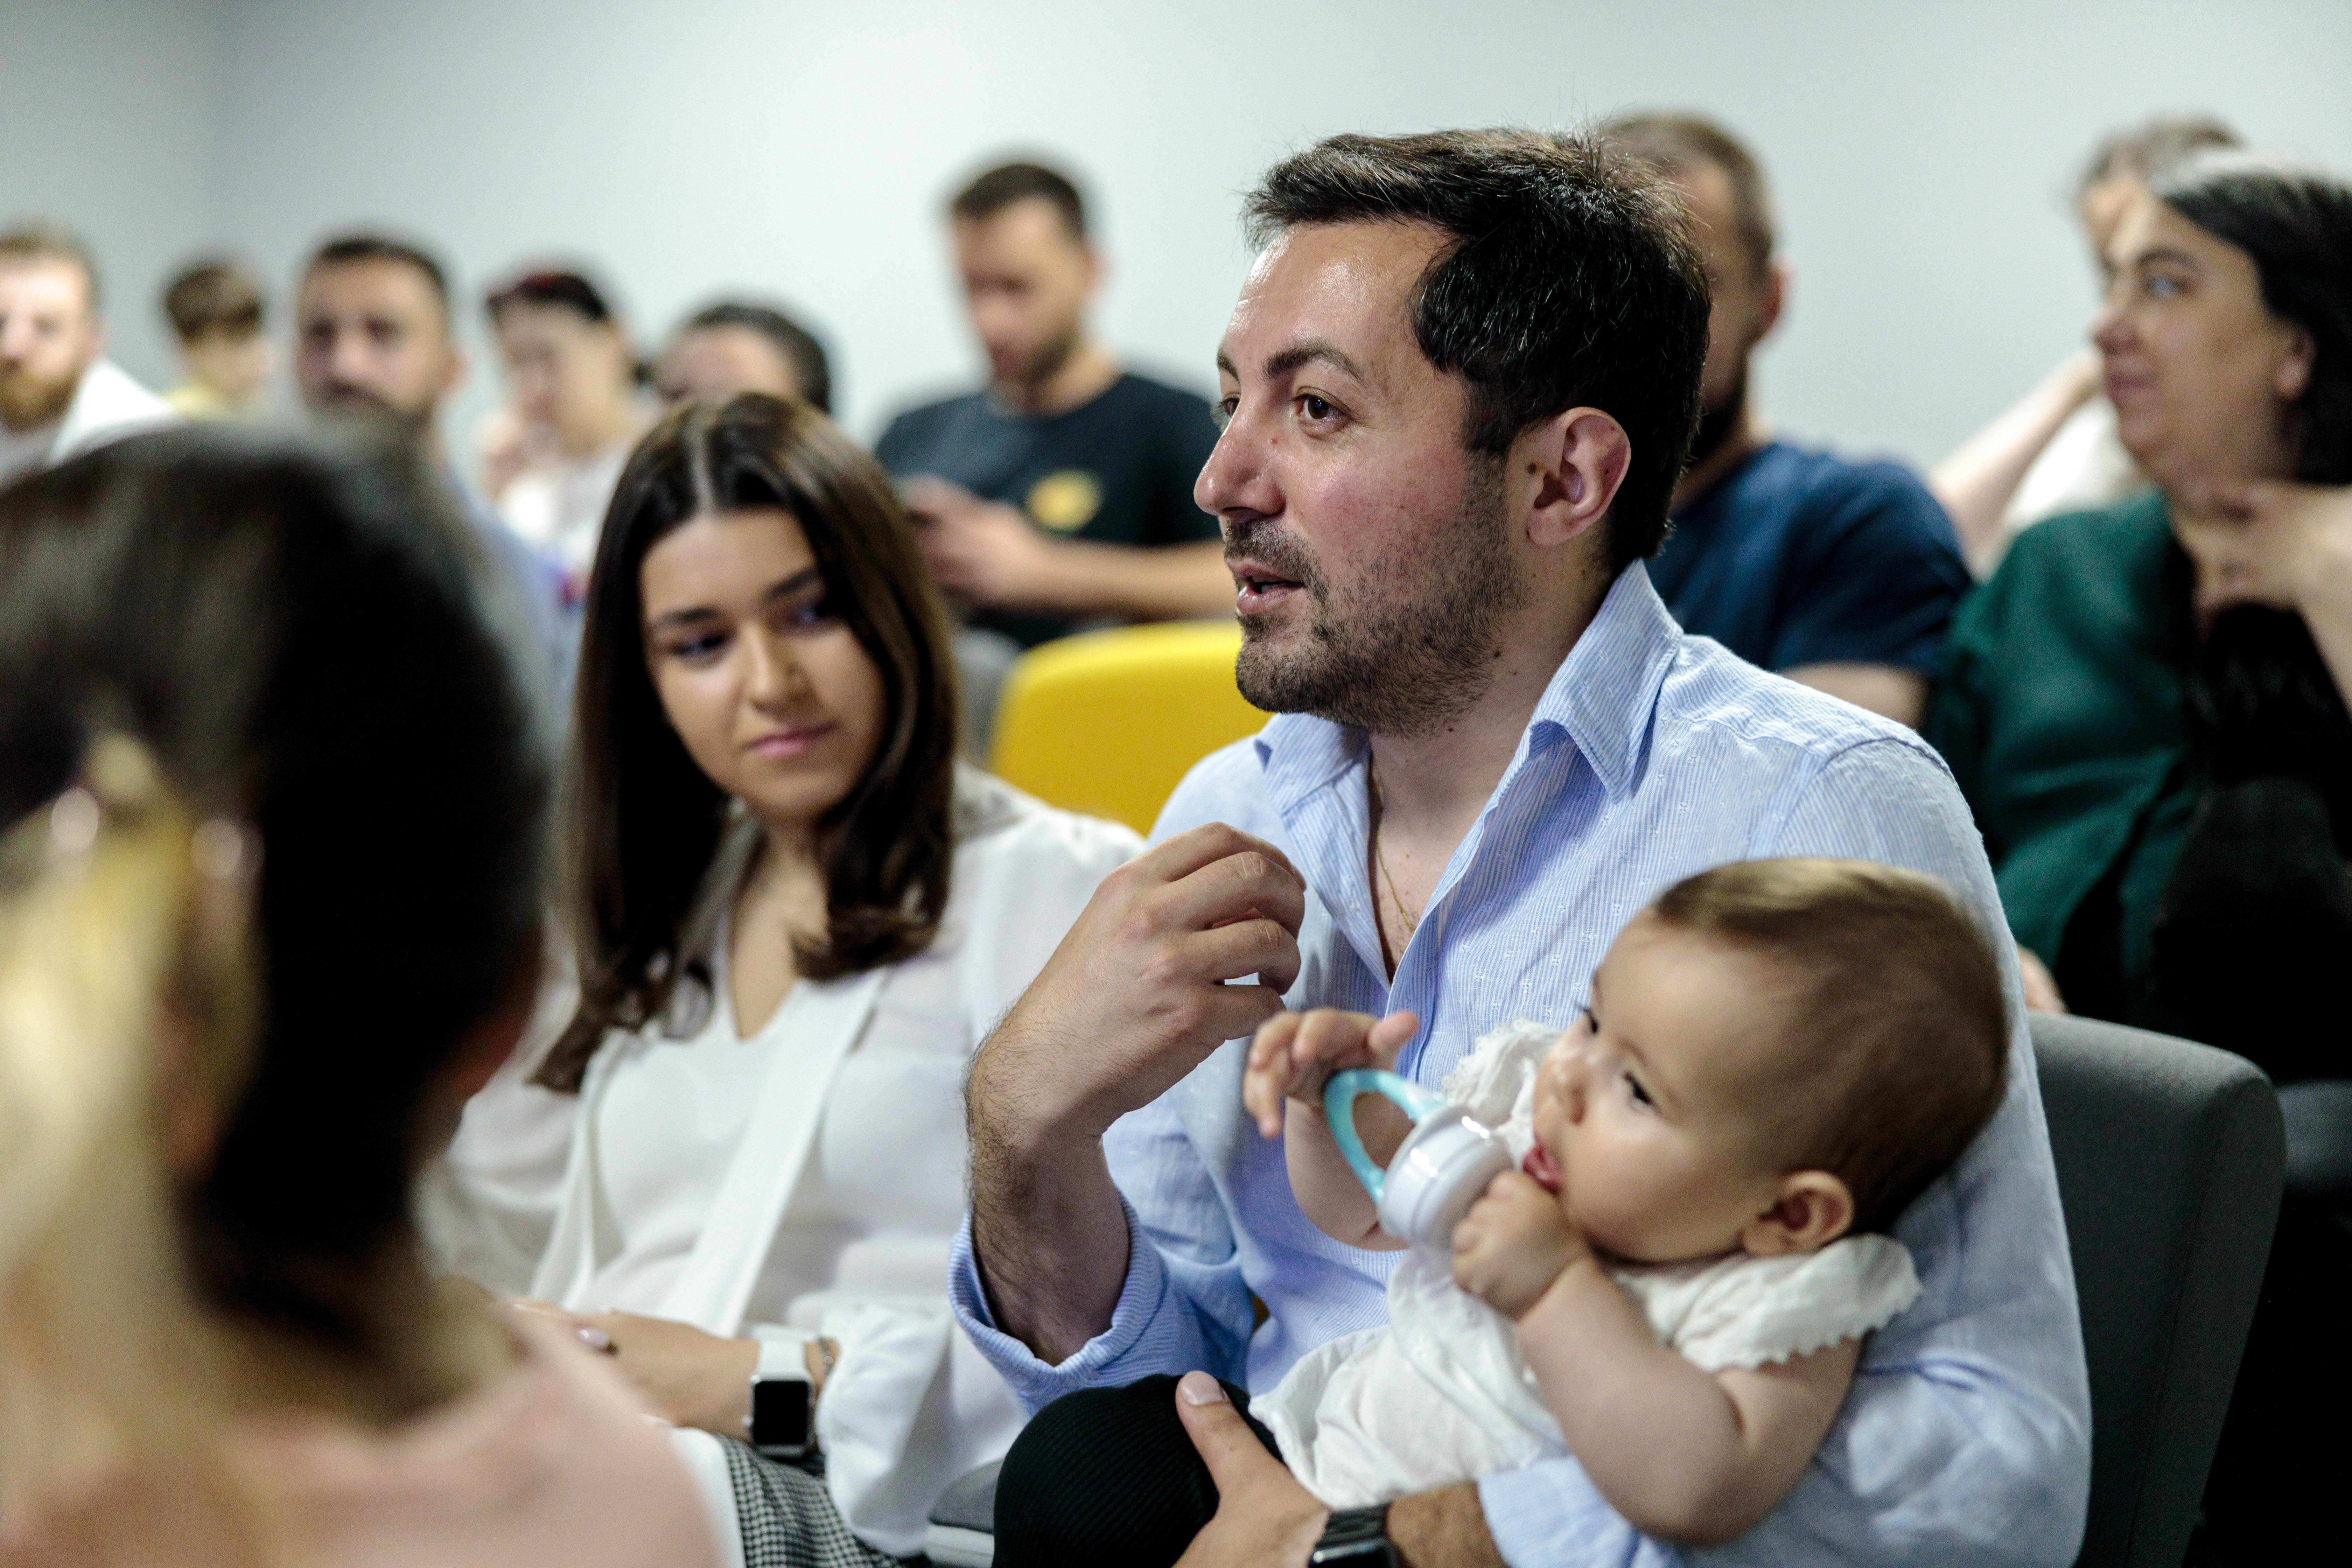 Man with brown hair and beard speaks in a group while holding a baby in his left arm. Woman with brown hair listens next to him